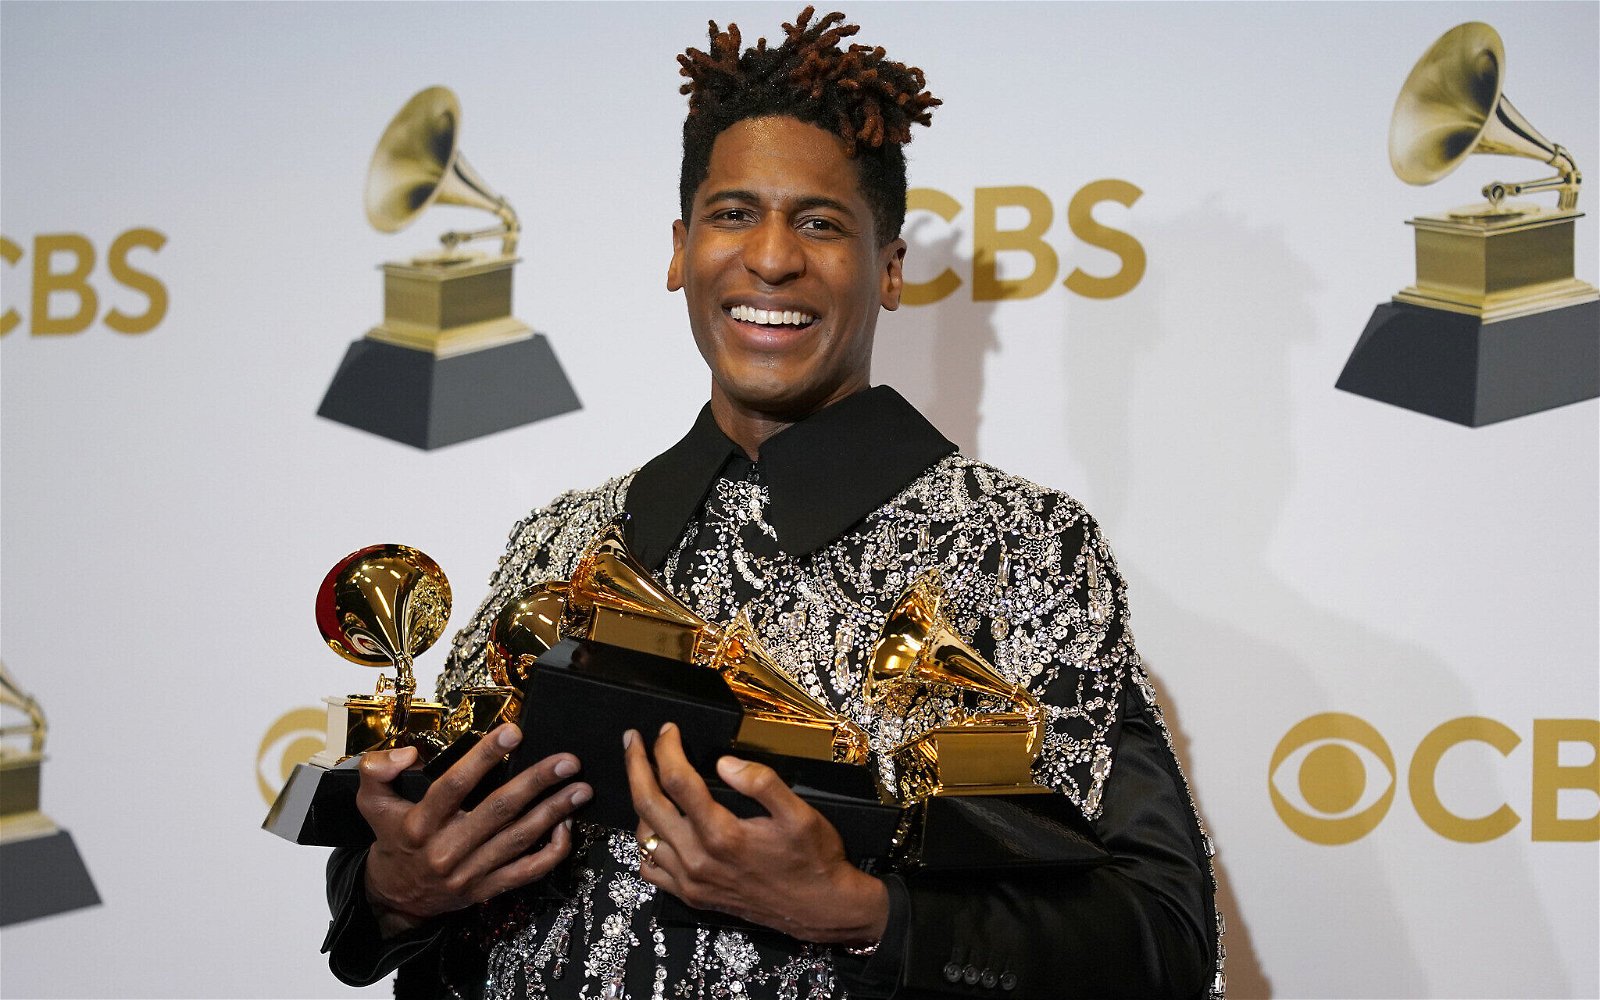 Why is Jon Batiste's acceptance speech at the Grammy Awards in 2022